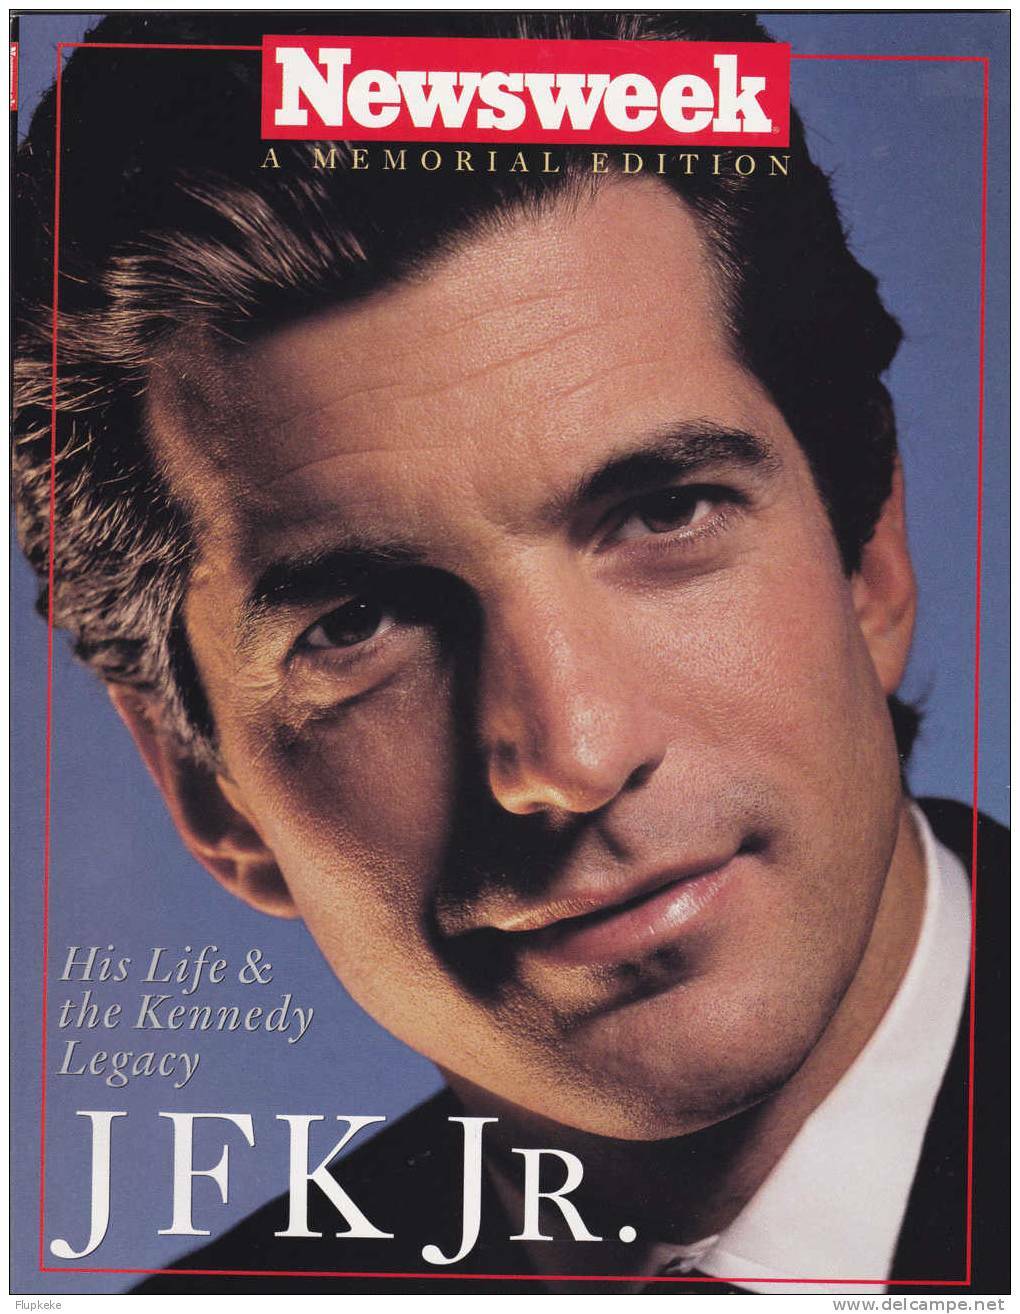 Newsweek Summer-fall 1999 A Memorial Edition Kennedy  JFK Jr. His Life & The Kennedy Legacy 1960-1999 - Histoire